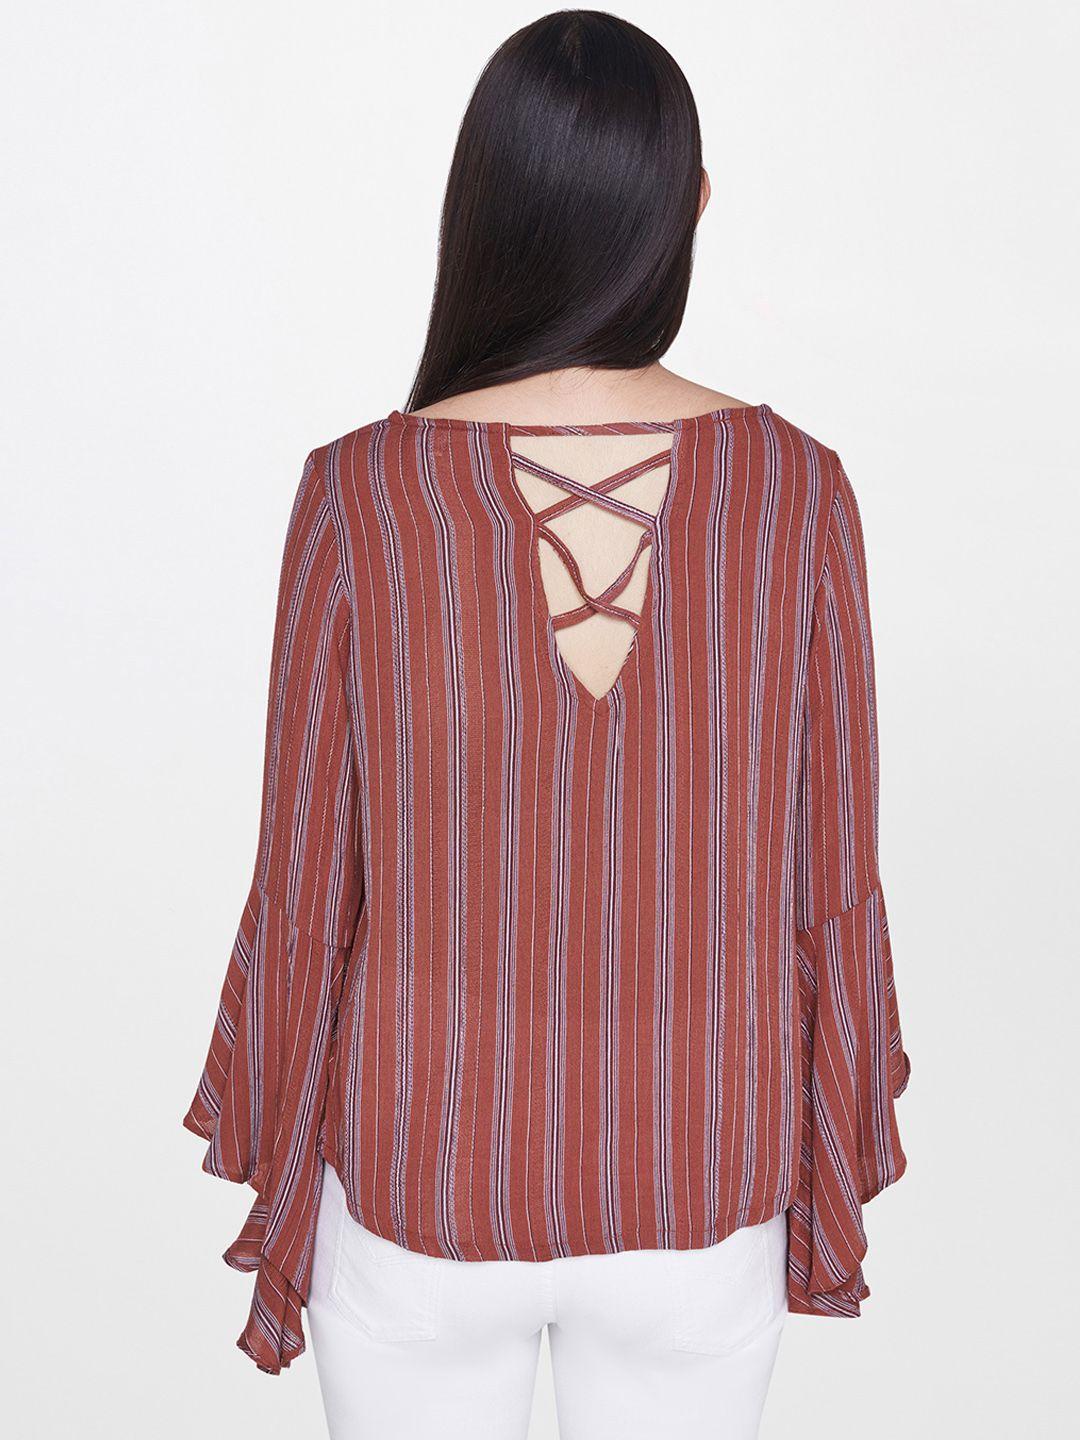 and-women-rust-brown-&-white-striped-styled-back-top